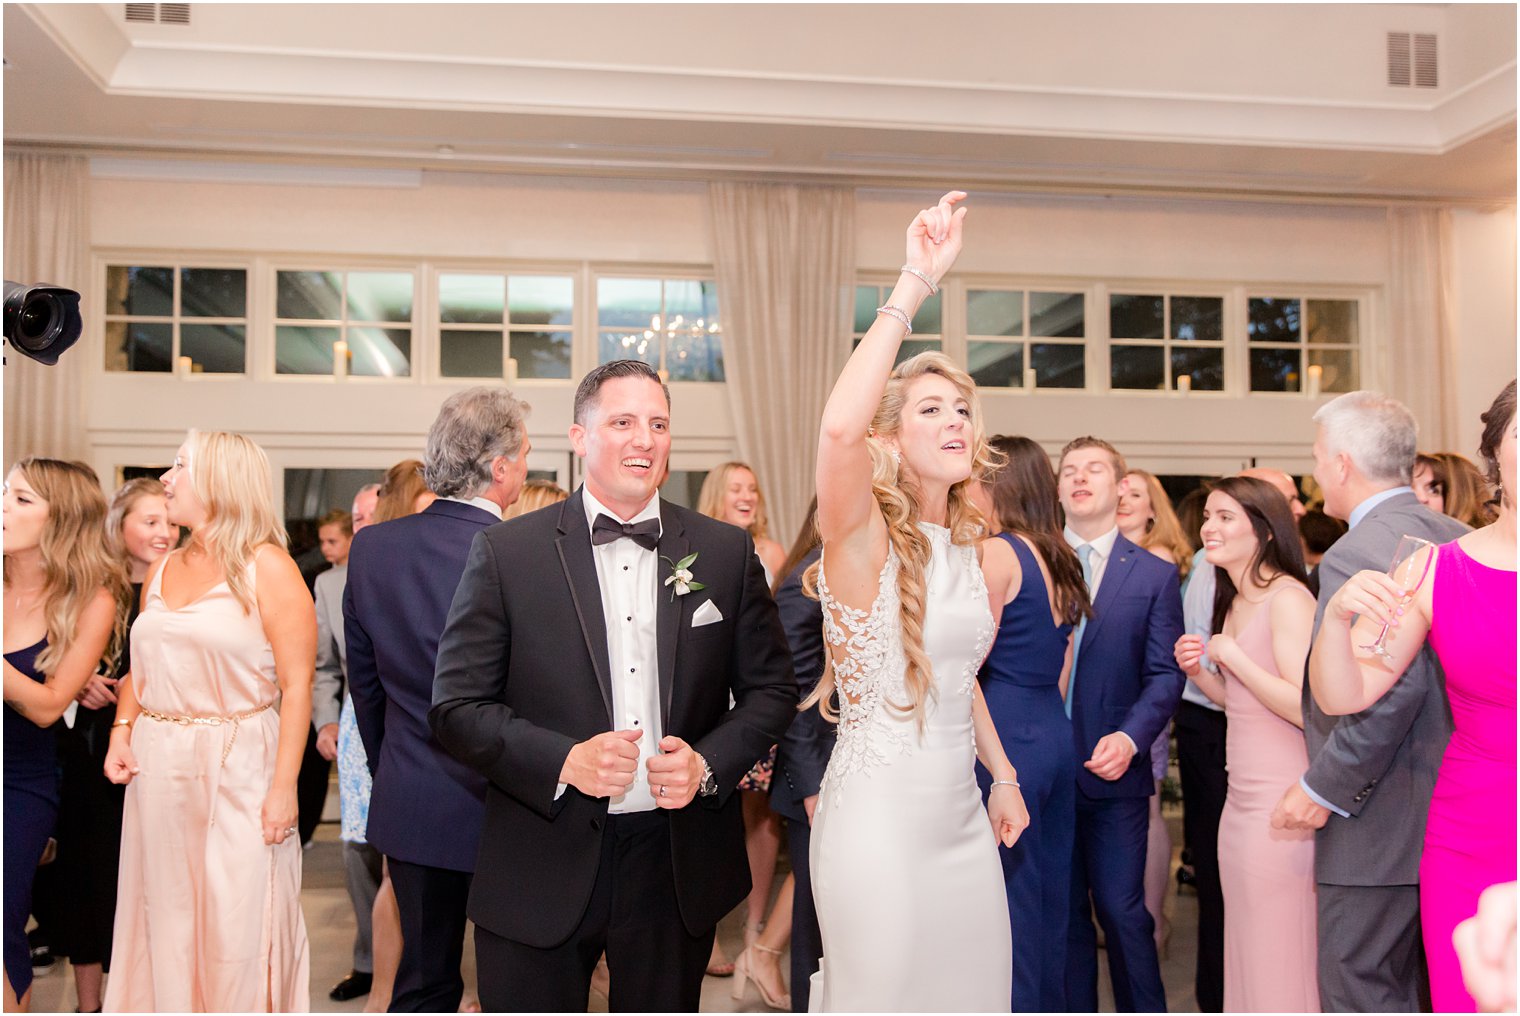 wedding reception dancing photos at Indian Trail Club in Franklin Lakes, NJ